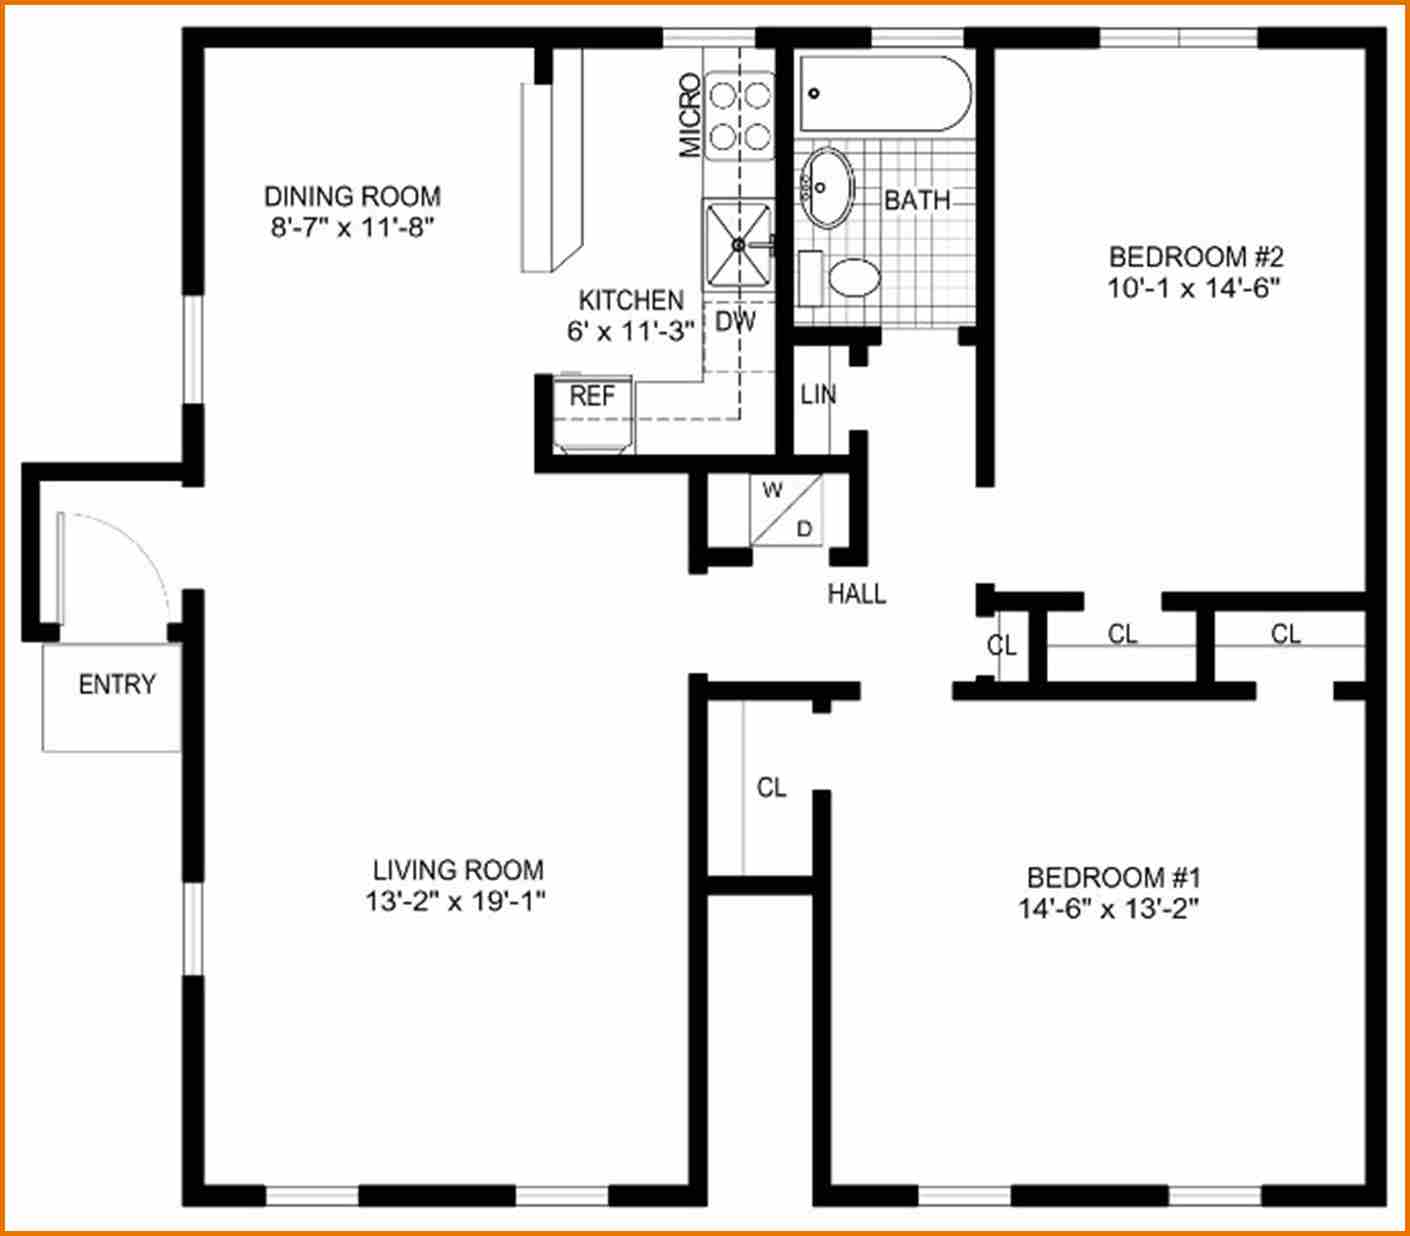 PDF Floor Plan Templates Documents and PDFs